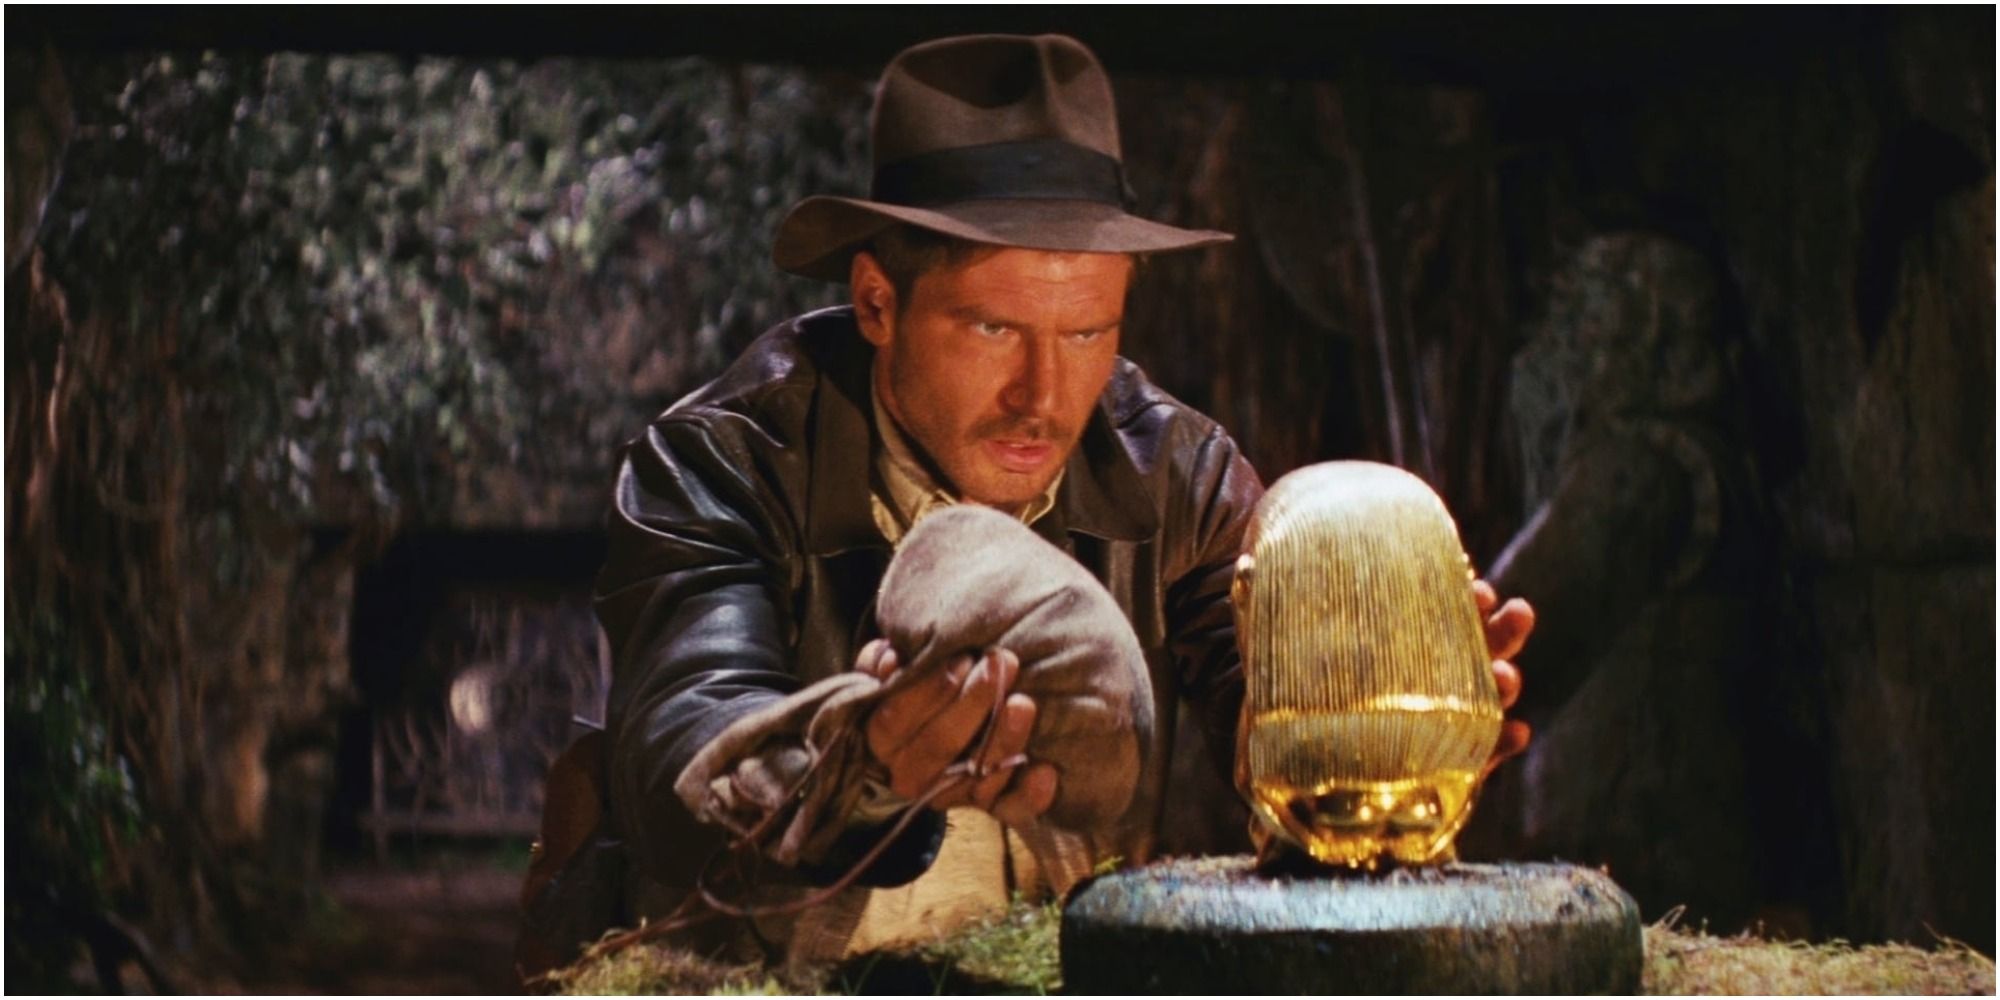 Indiana Jones in a temple in the opening scene of Raiders of the Lost Ark